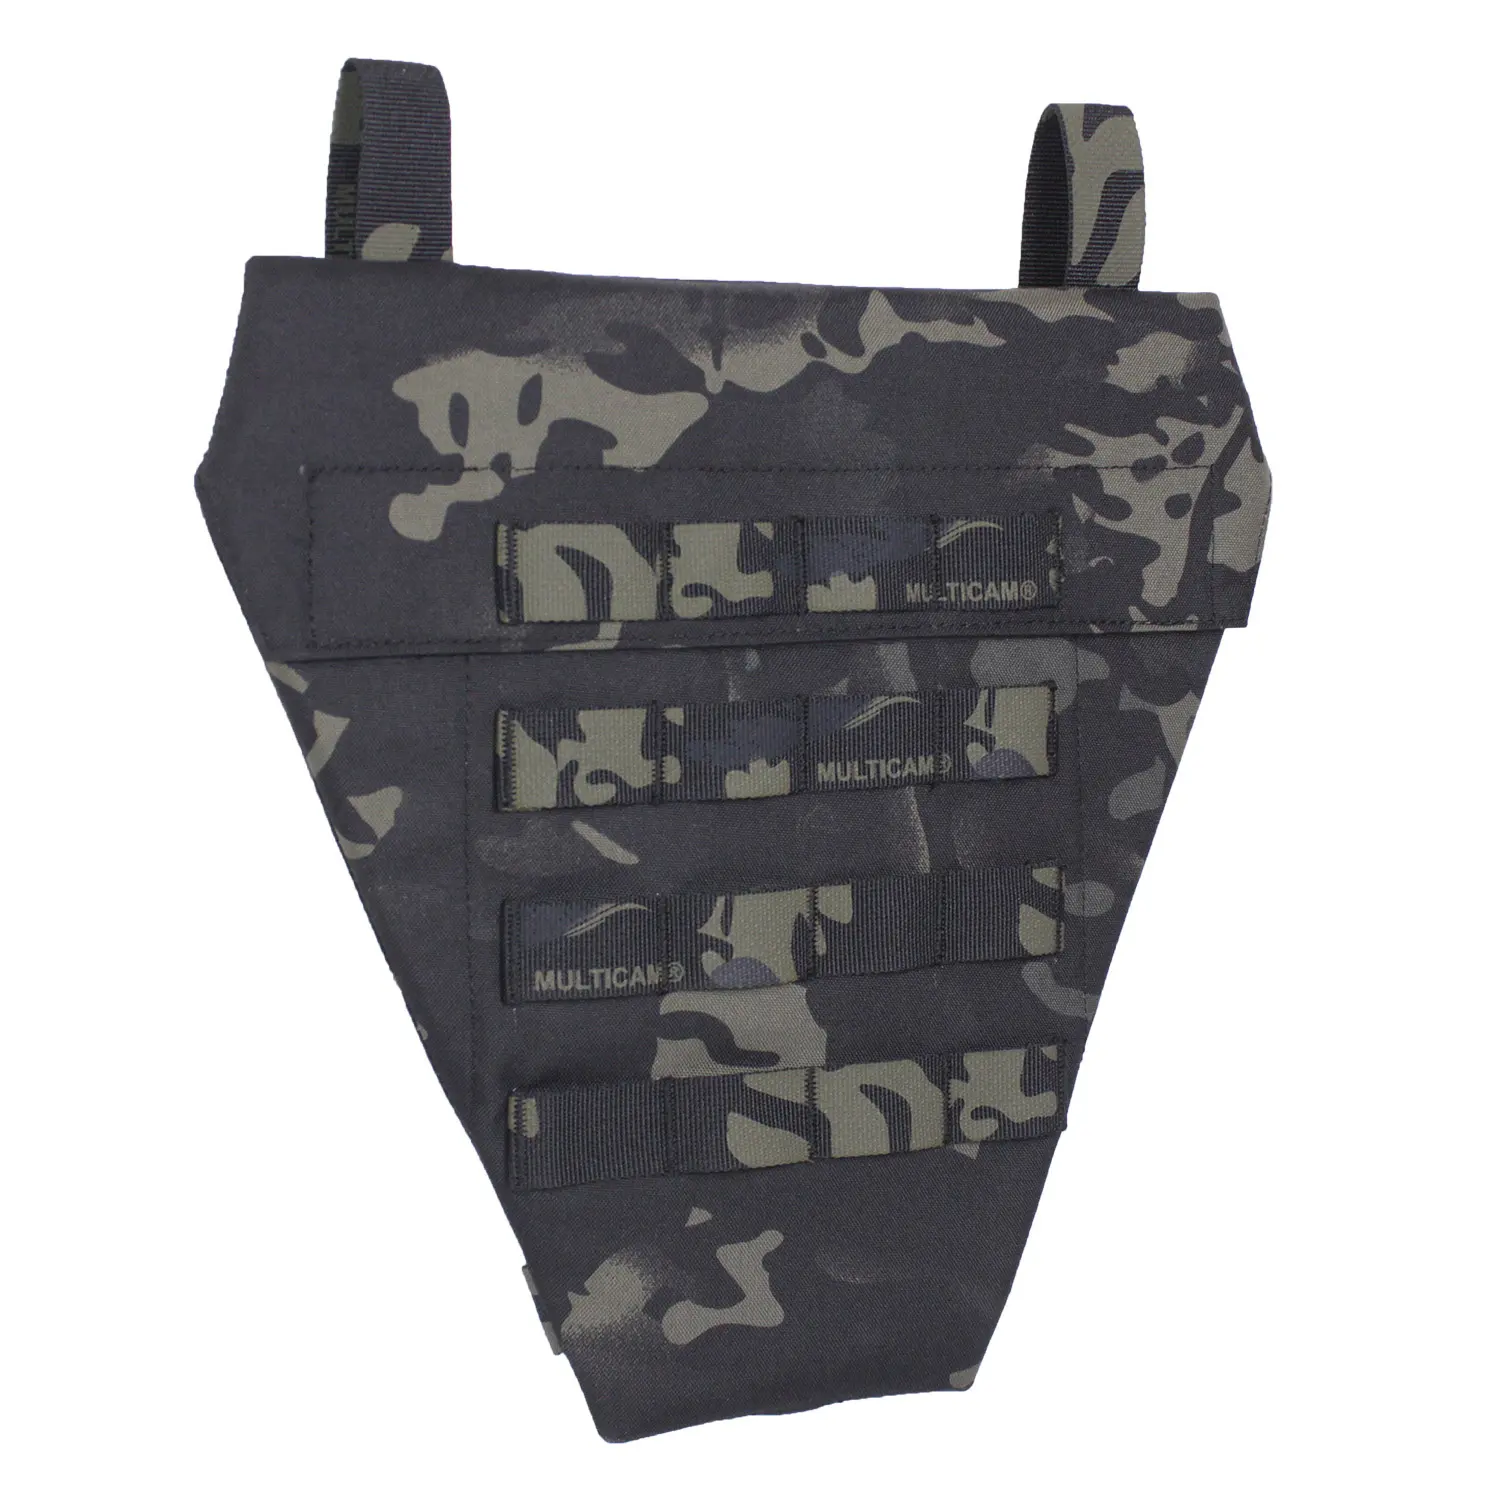 Tactical Gear Plate Carries MCBK LAP Style Dangler Bag Camouflage Nylon Fabric New Arrival